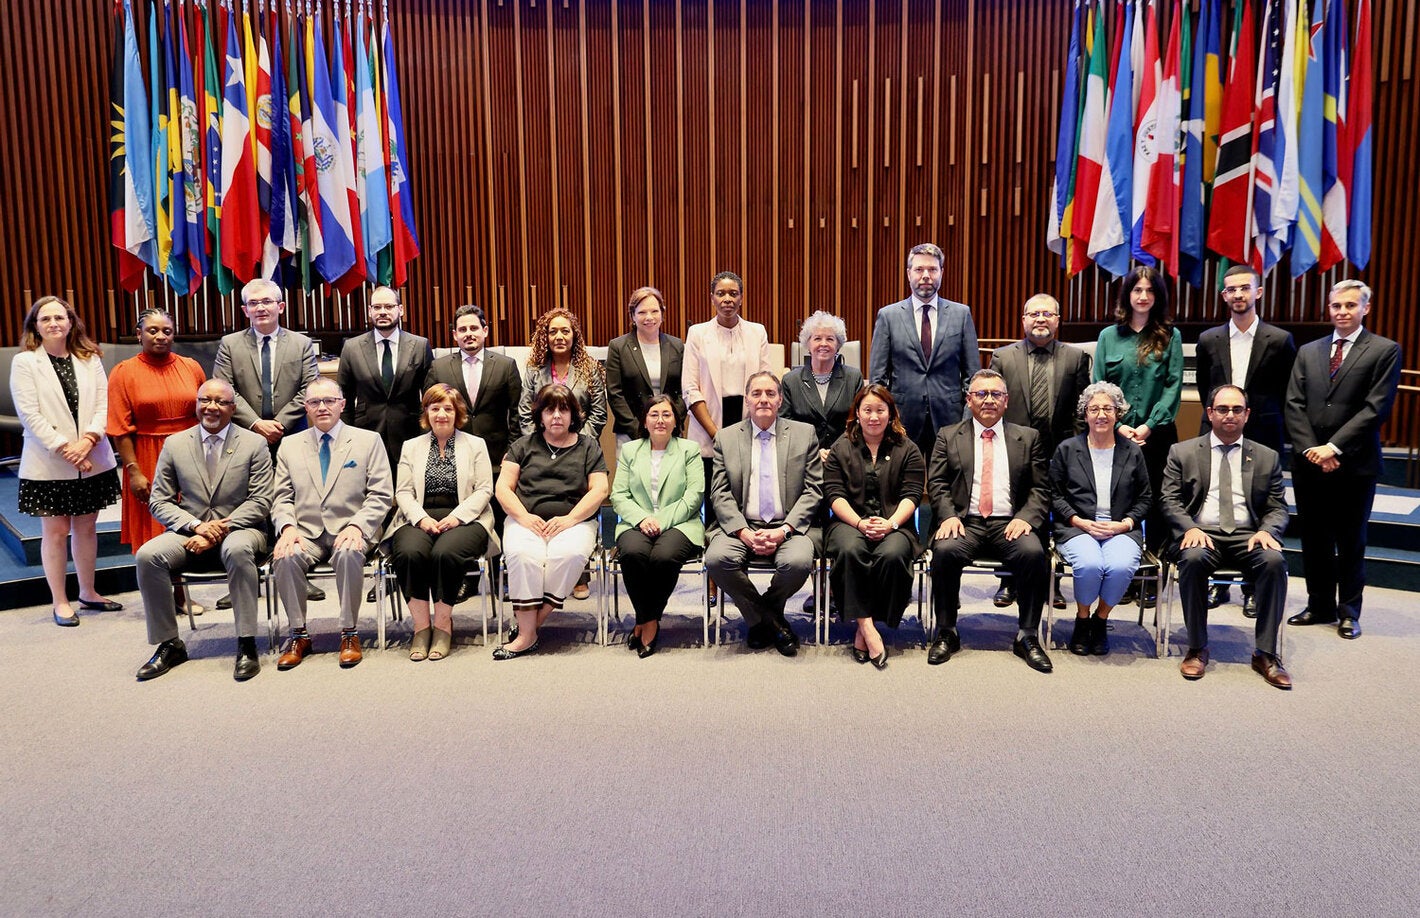 The Executive Committee of the Pan American Health Organization (PAHO) today began its 174th session in Washington, D.C